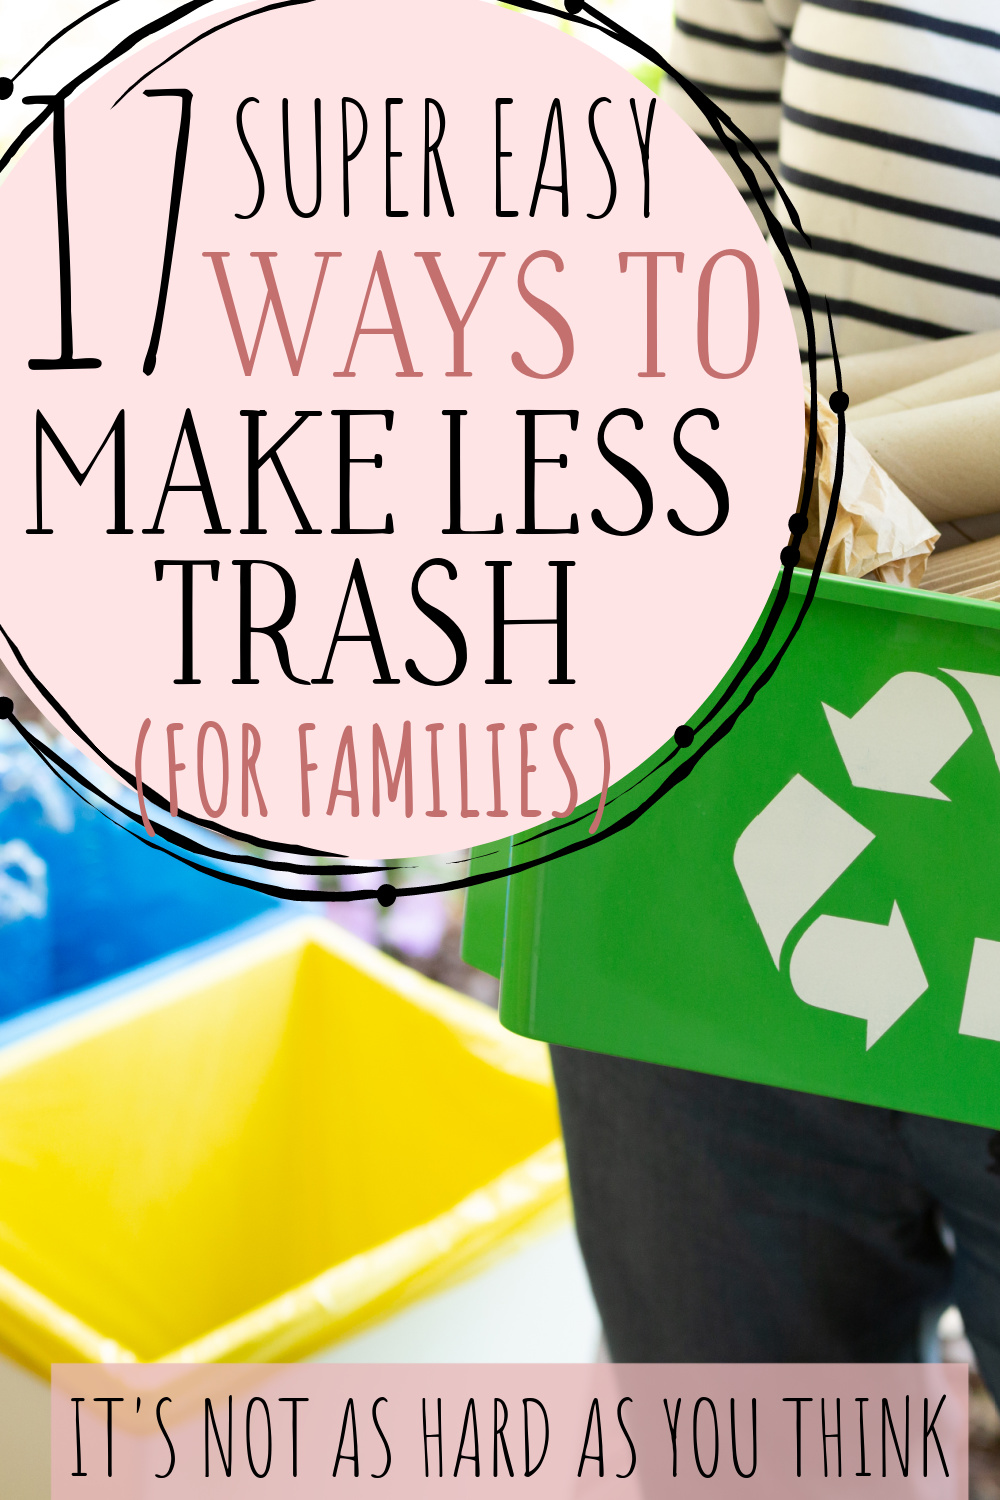 woman holding green recycling bin with text overlay, "17 super easy ways to make less trash (for families) - it's not as hard as you think"